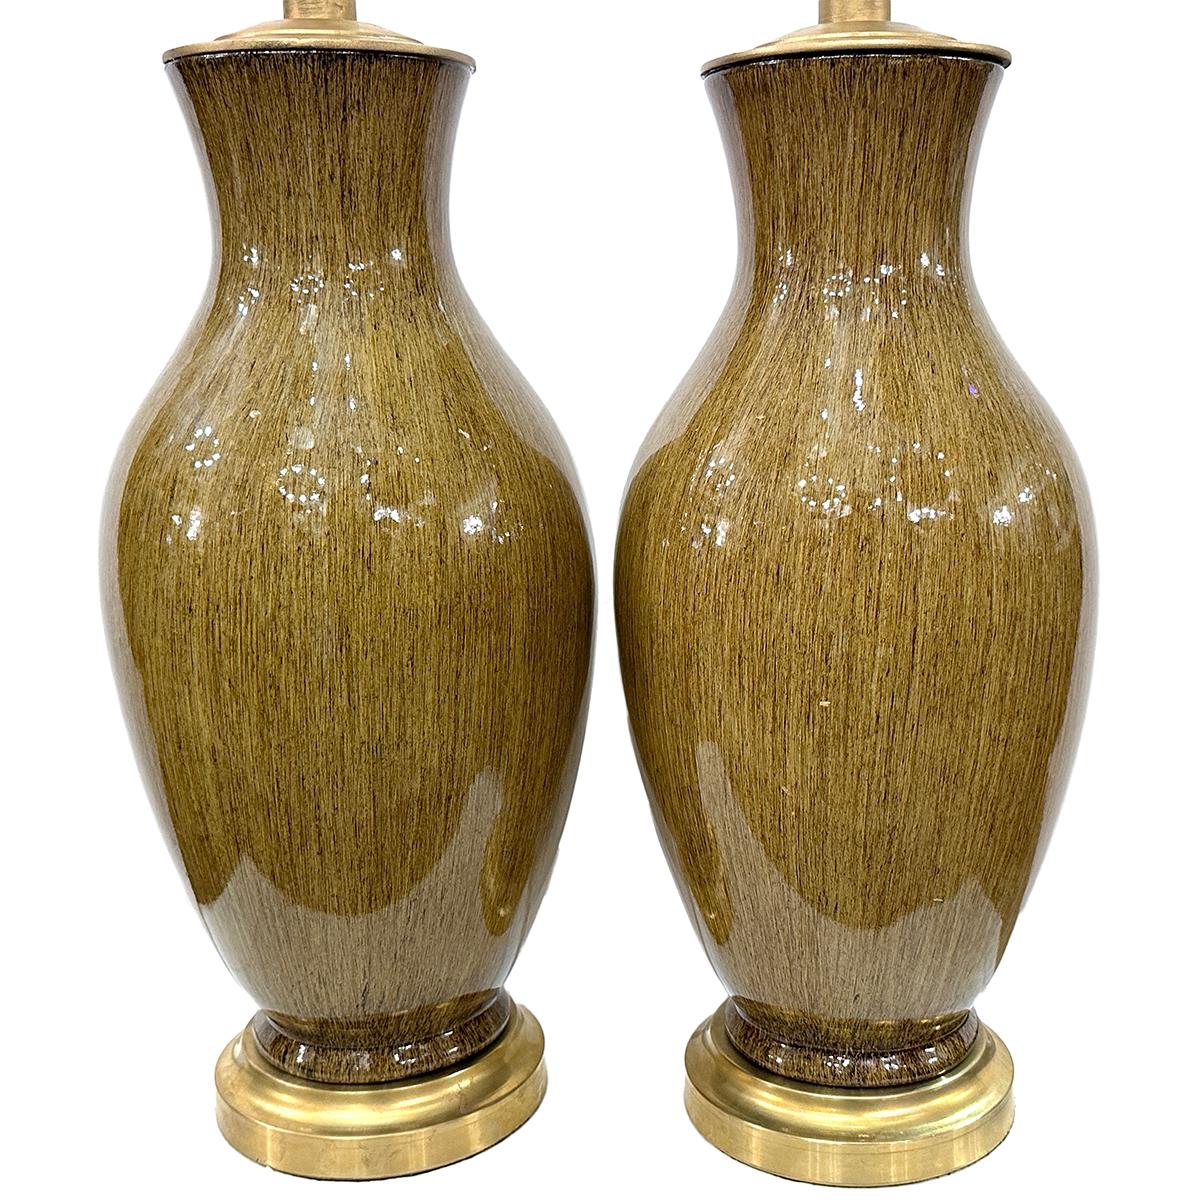 Pair of circa 1960s Italian porcelain table lamps.

Measurements:
Height of body: 22